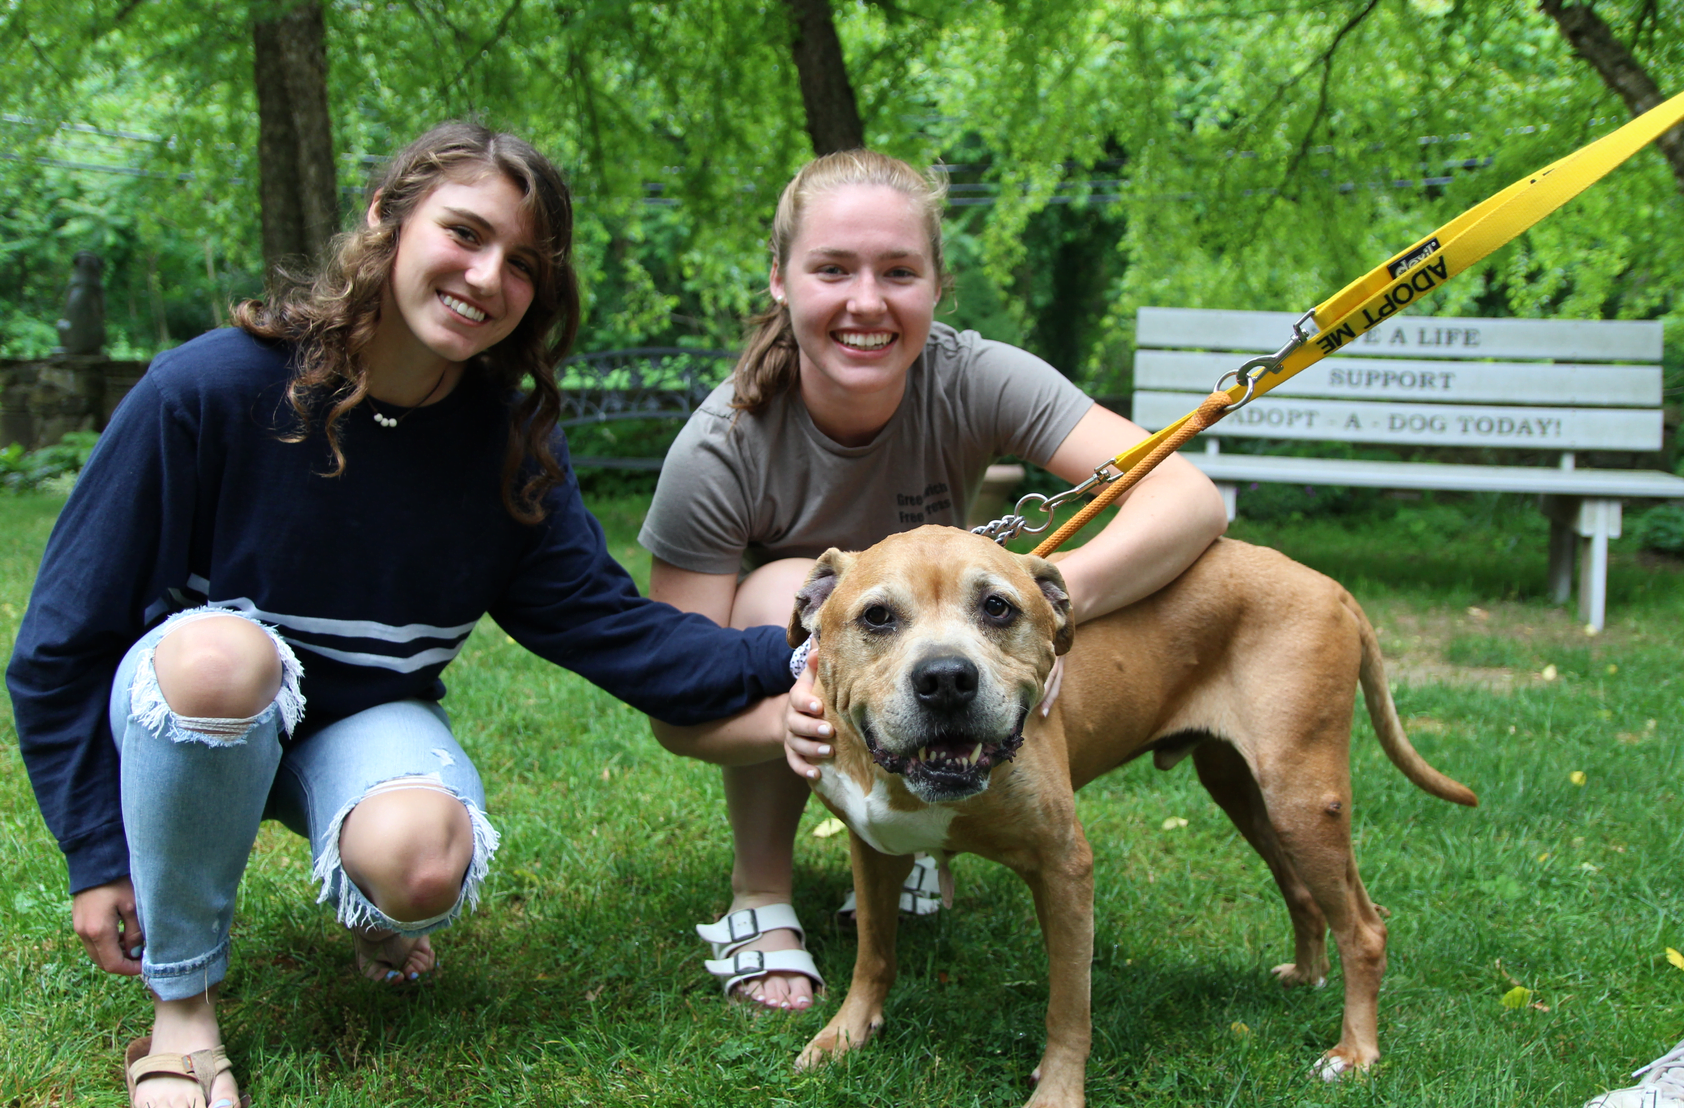 Katie and Ellie with Dugan at Adopt a Dog. June 10, 2019 Photo: Leslie Yager